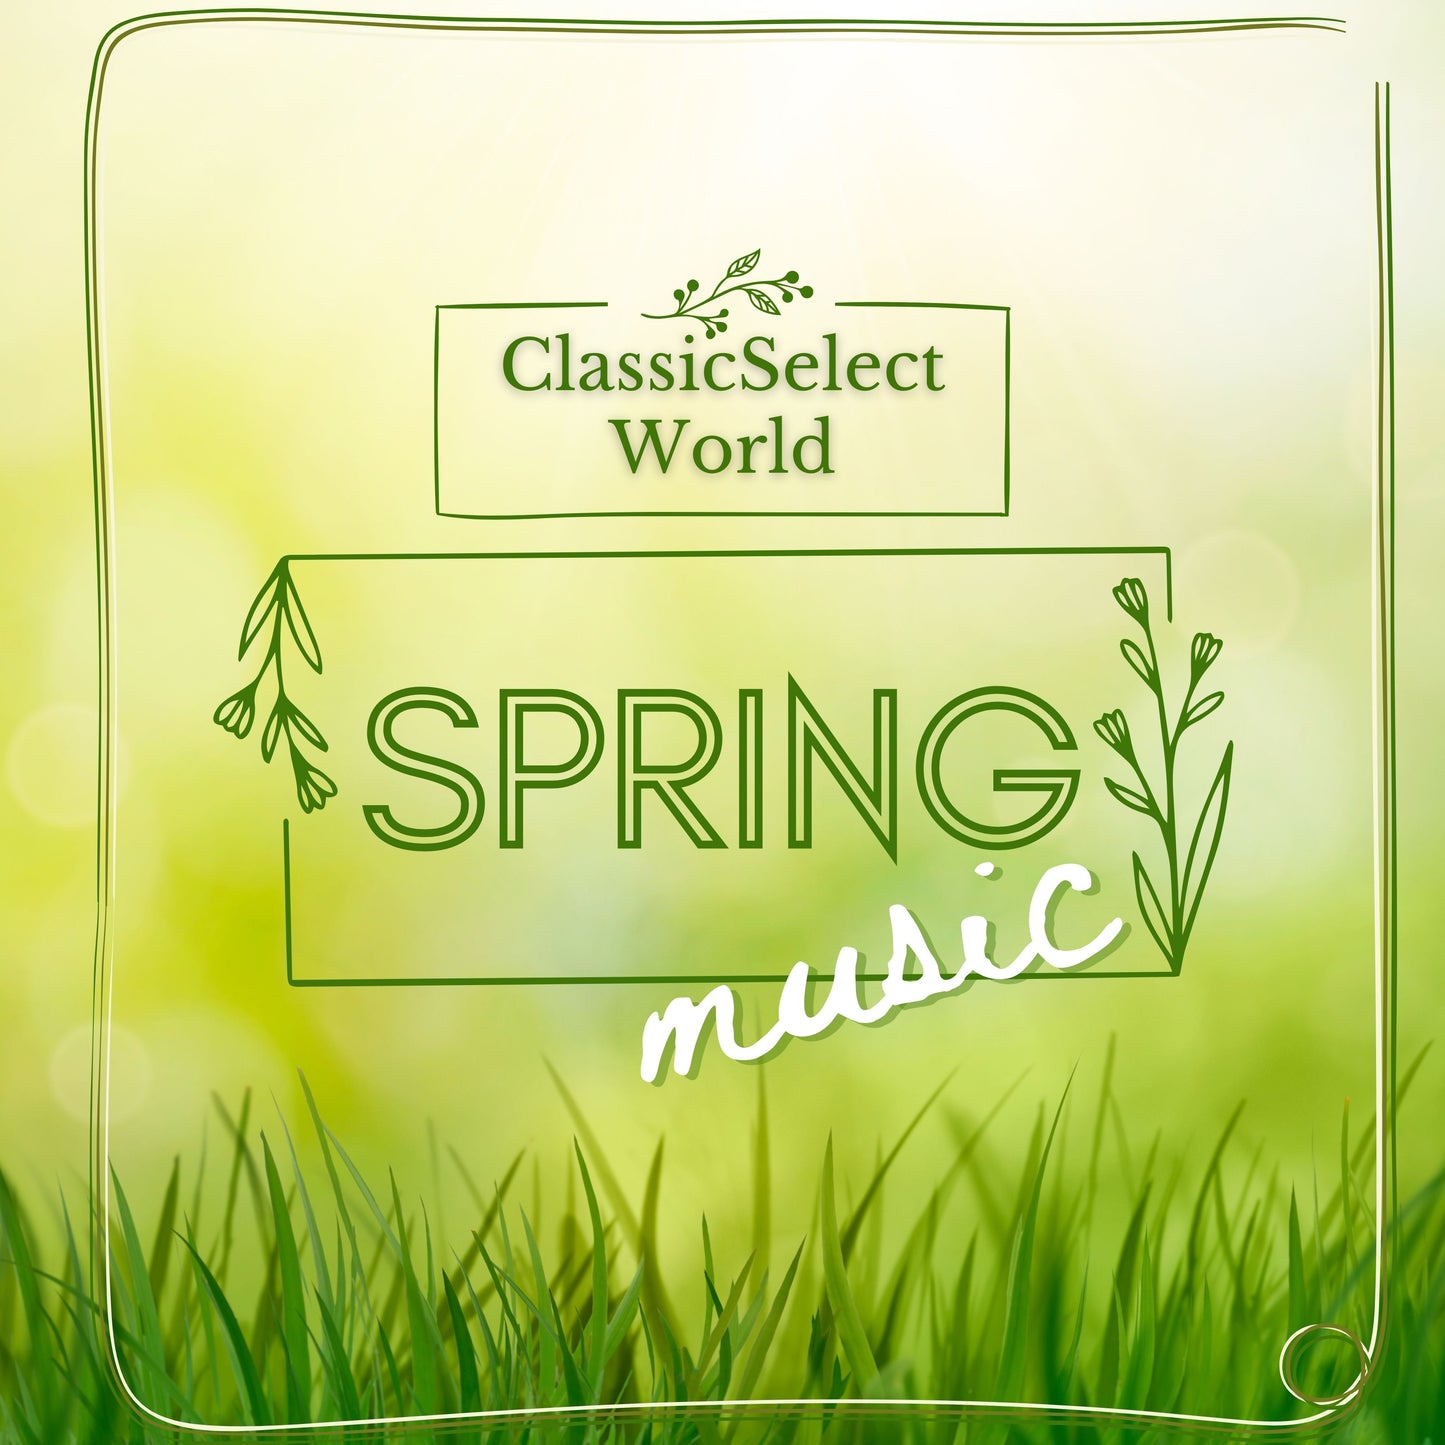 THE ClassicSelect World SPRING SAMPLER - FREE MP3 DOWNLOAD